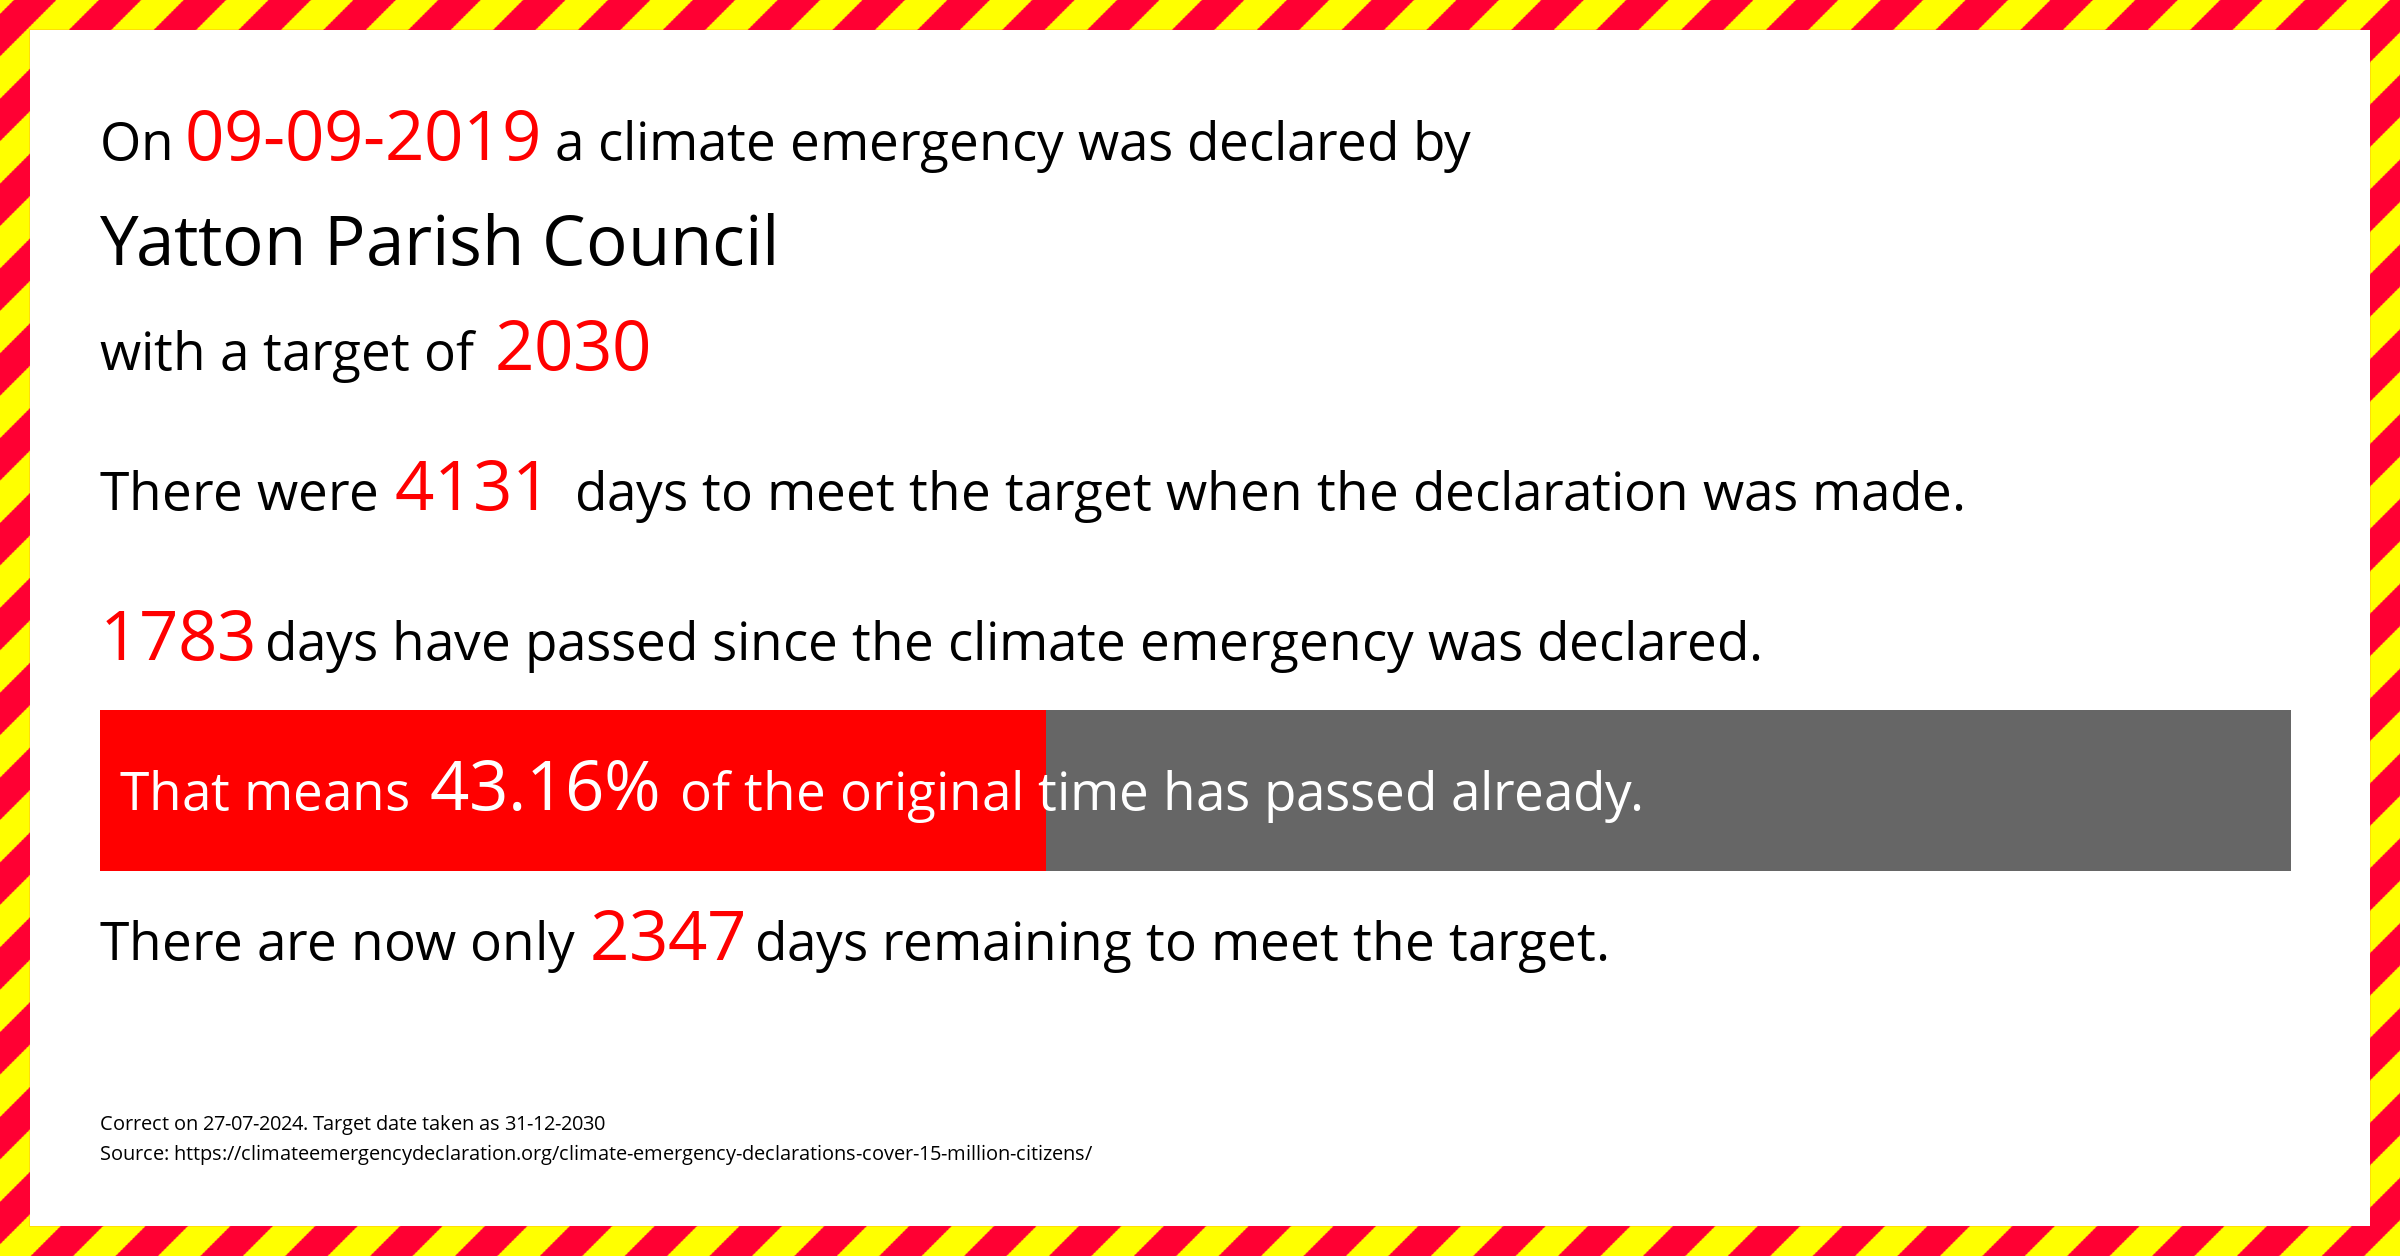 Yatton Parish Council declared a Climate emergency on Monday 9th September 2019, with a target of 2030.